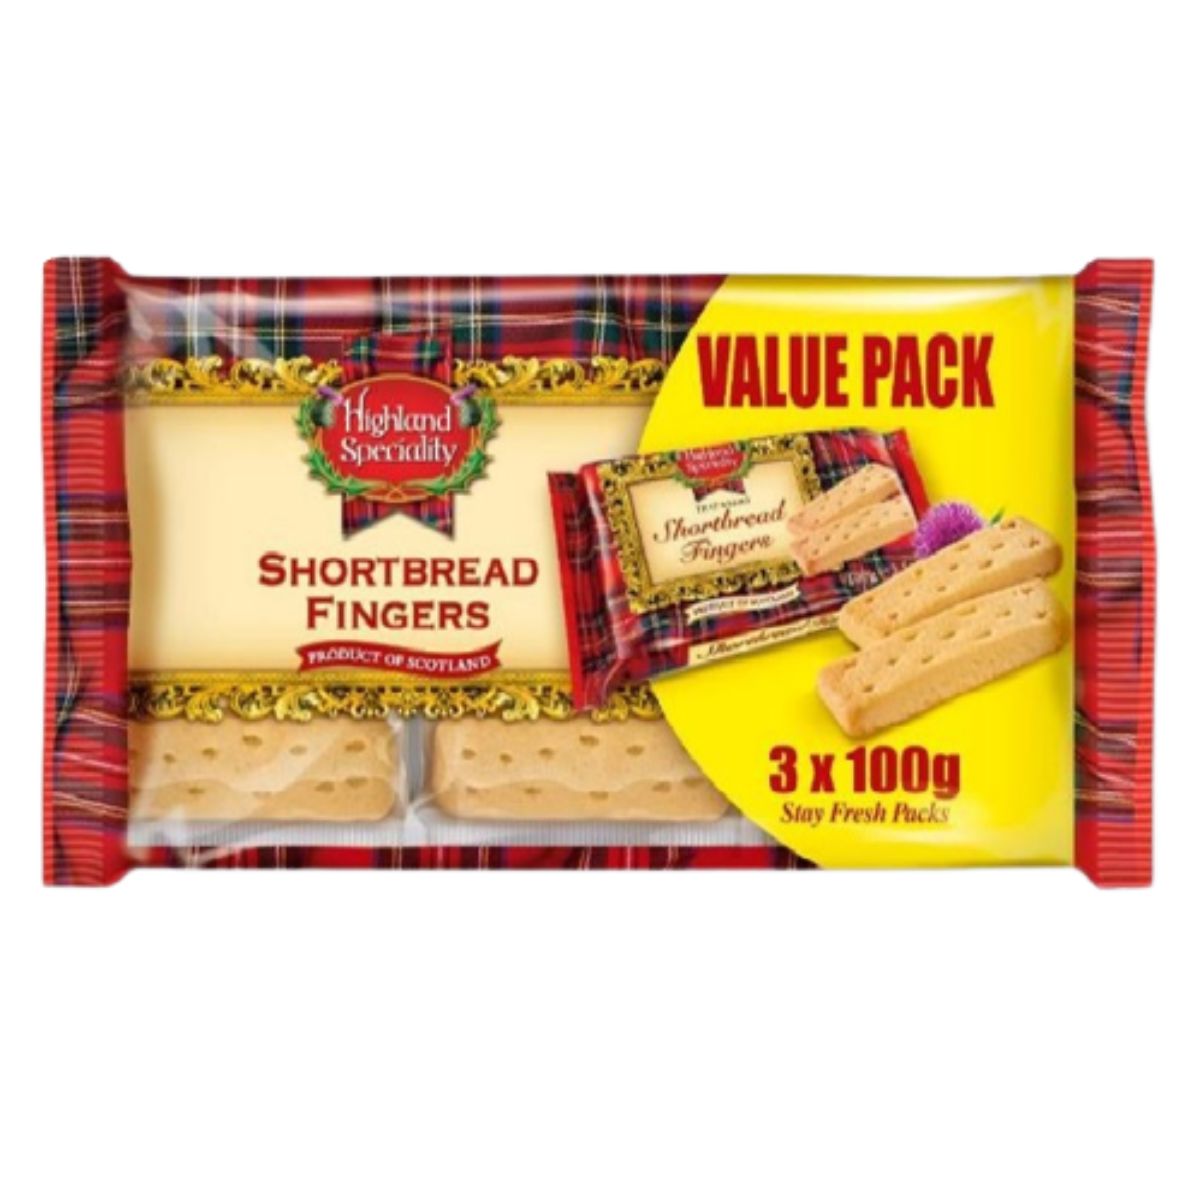 A bag of Highland Speciality - Shortbread Fingers - 300g with tartan on it.